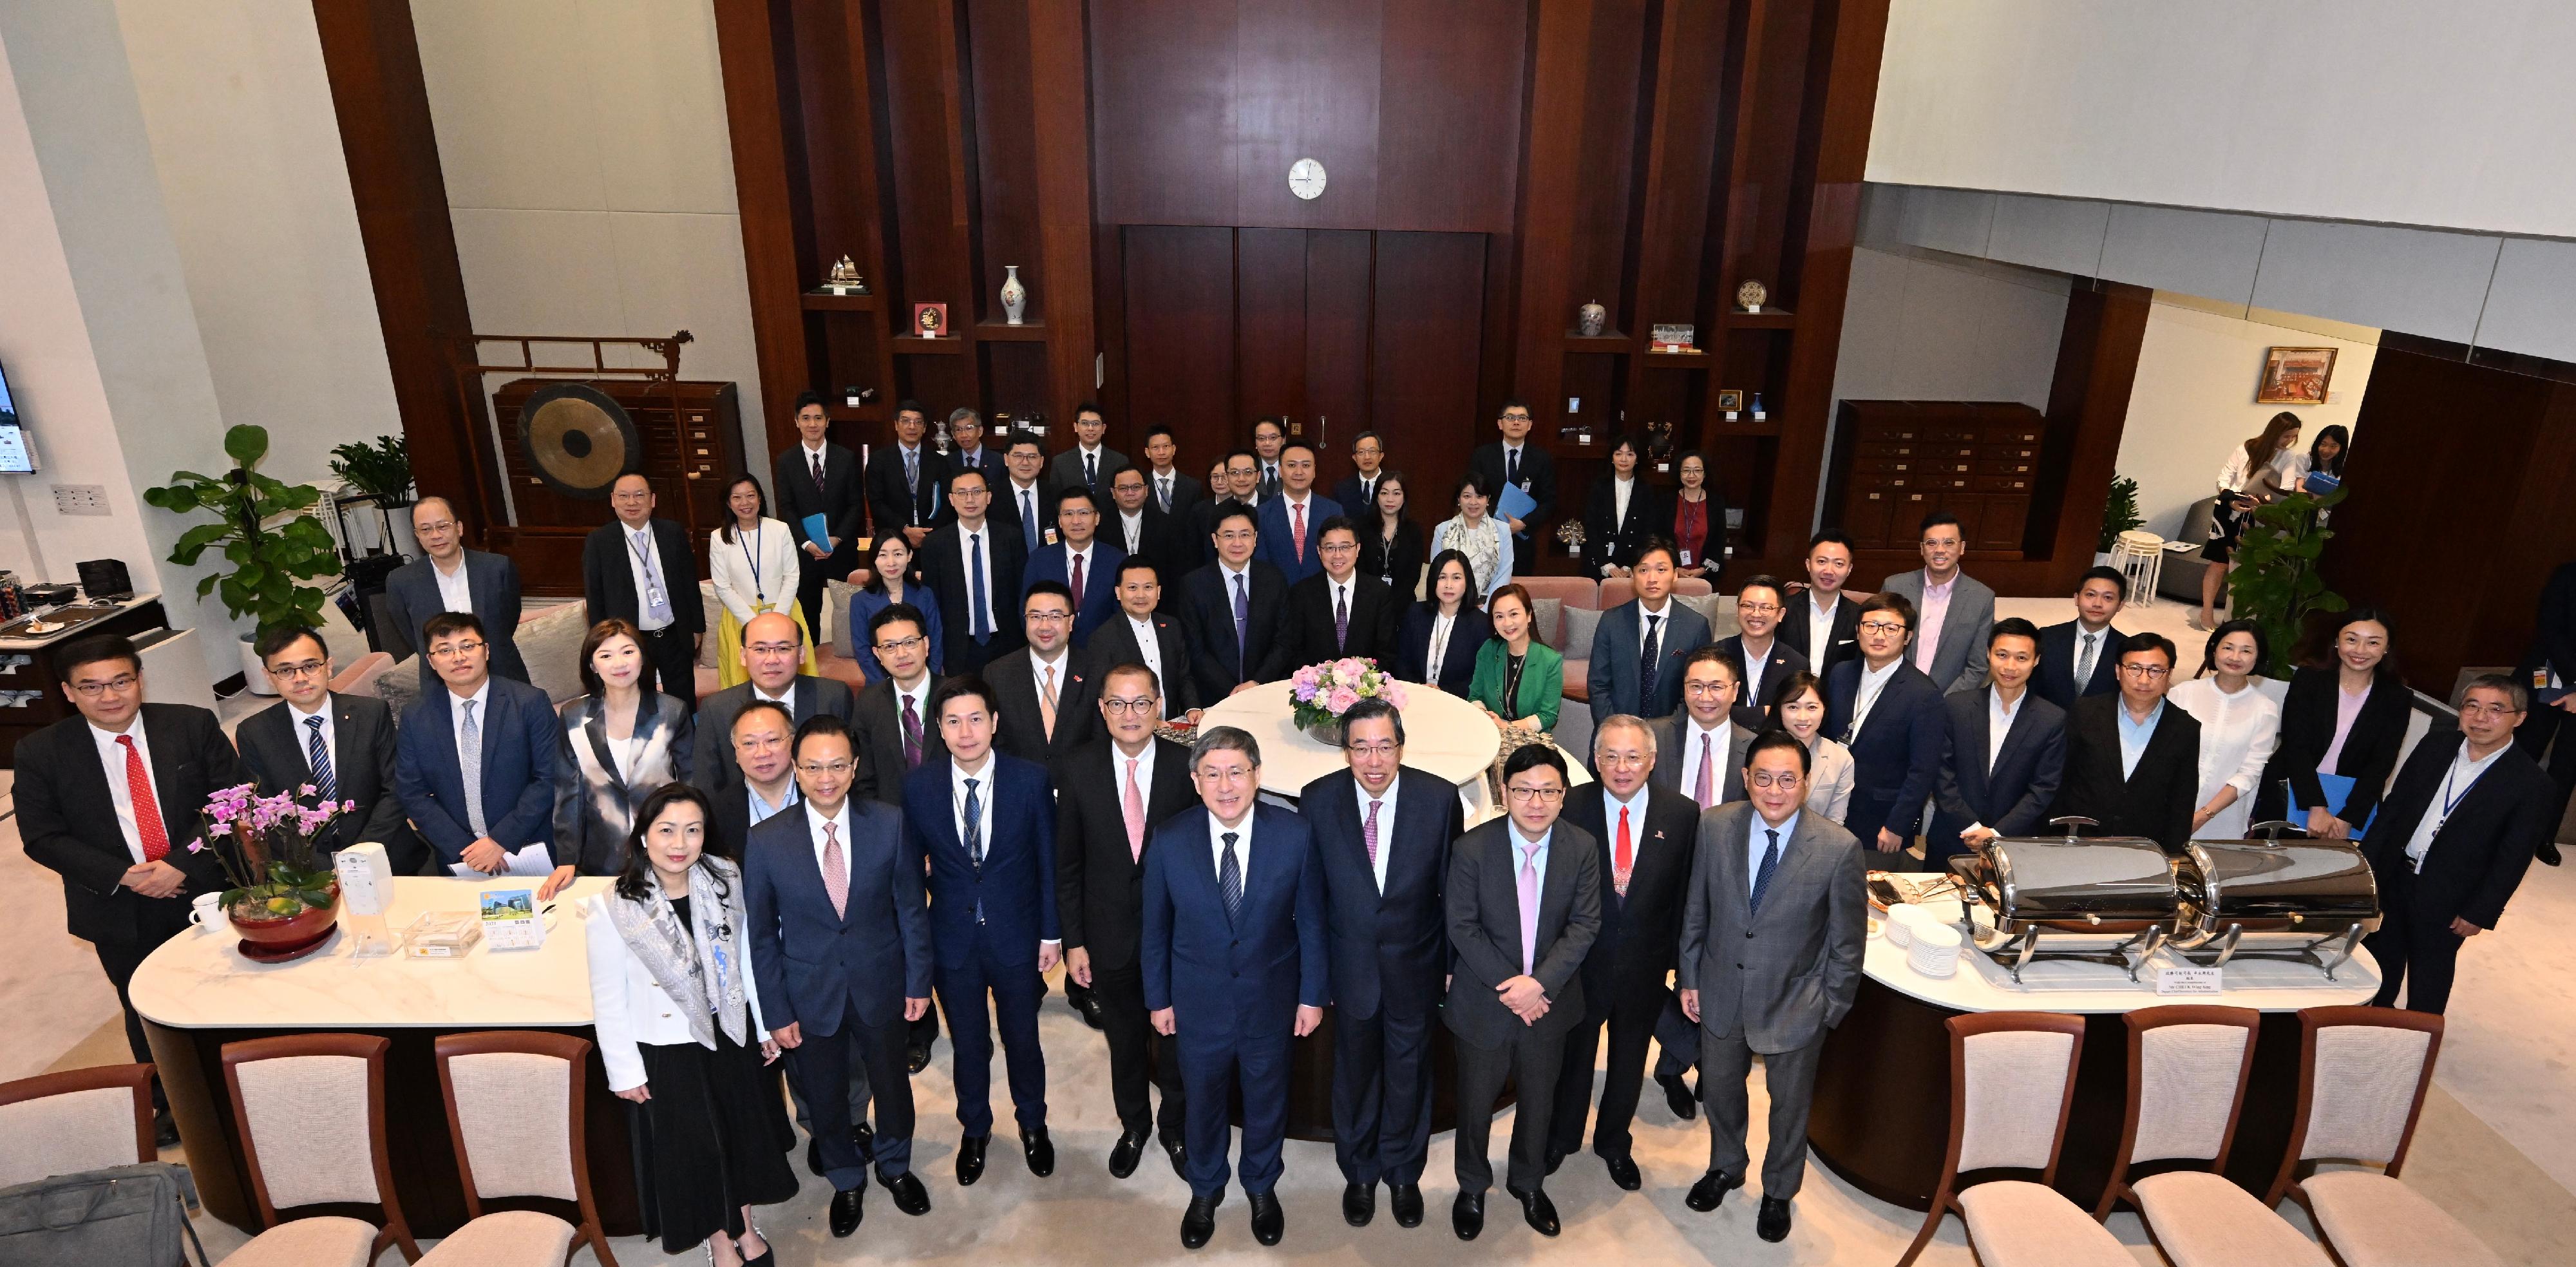 The Deputy Chief Secretary for Administration, Mr Cheuk Wing-hing, attended the Ante Chamber exchange session at the Legislative Council (LegCo) today (June 28). Photo shows Mr Cheuk (first row, centre); the President of the LegCo, Mr Andrew Leung (first row, fourth right); the Secretary for Health, Professor Lo Chung-mau (first row, fourth left); and the Secretary for Labour and Welfare, Mr Chris Sun (first row, third right), with LegCo Members before the meeting.